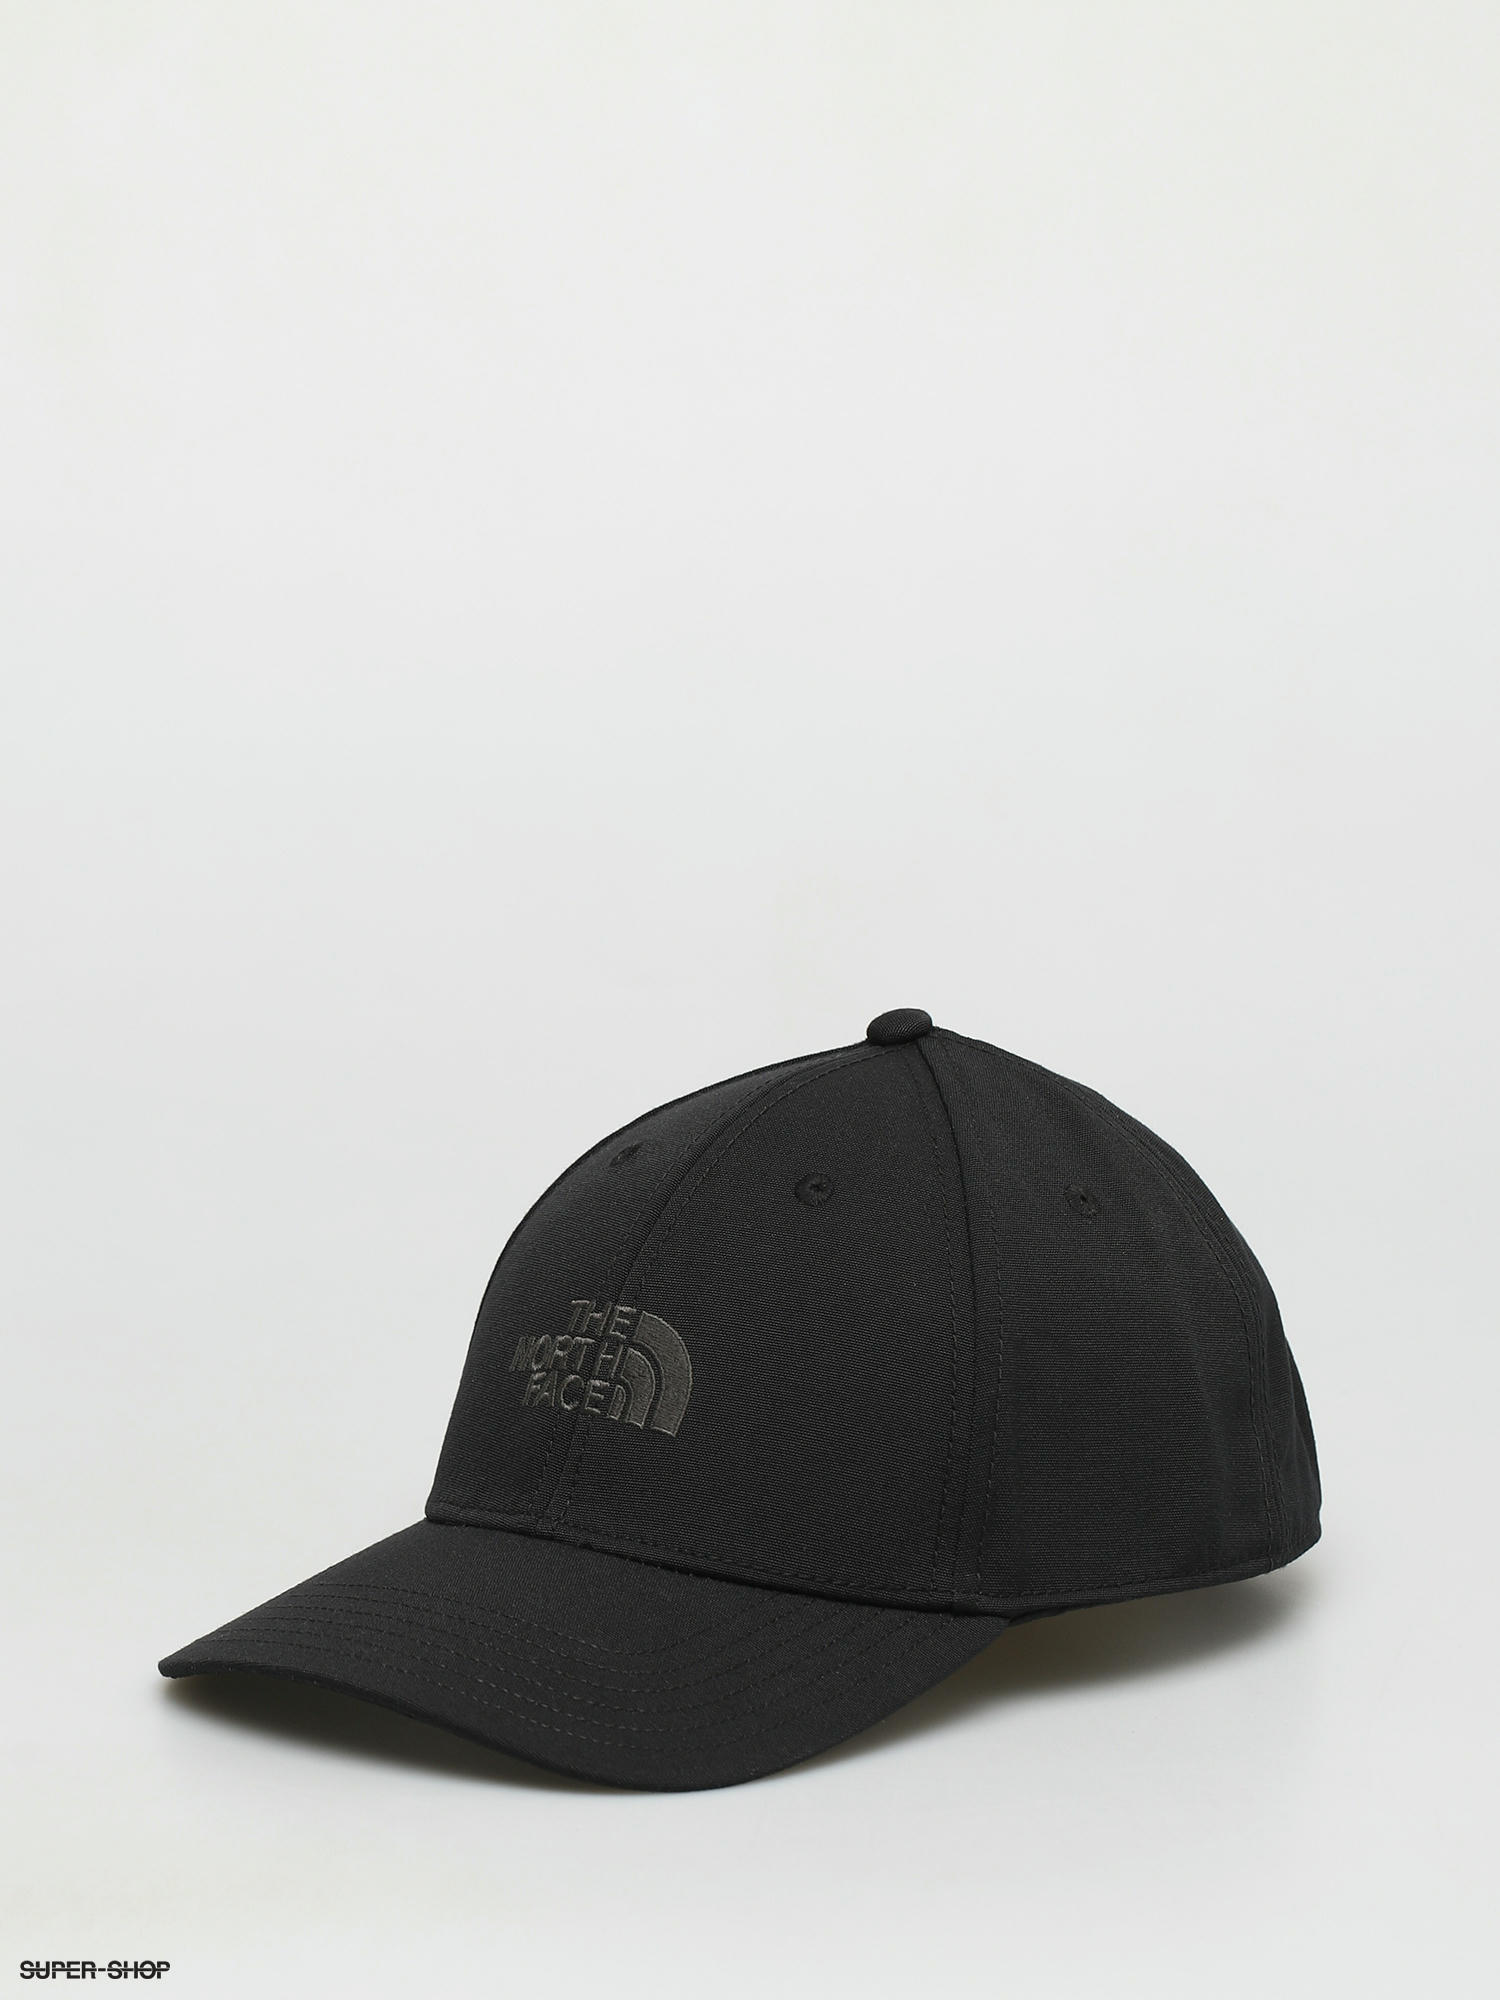 (tnf black) Recycled North Classic The ZD Cap 66 Face